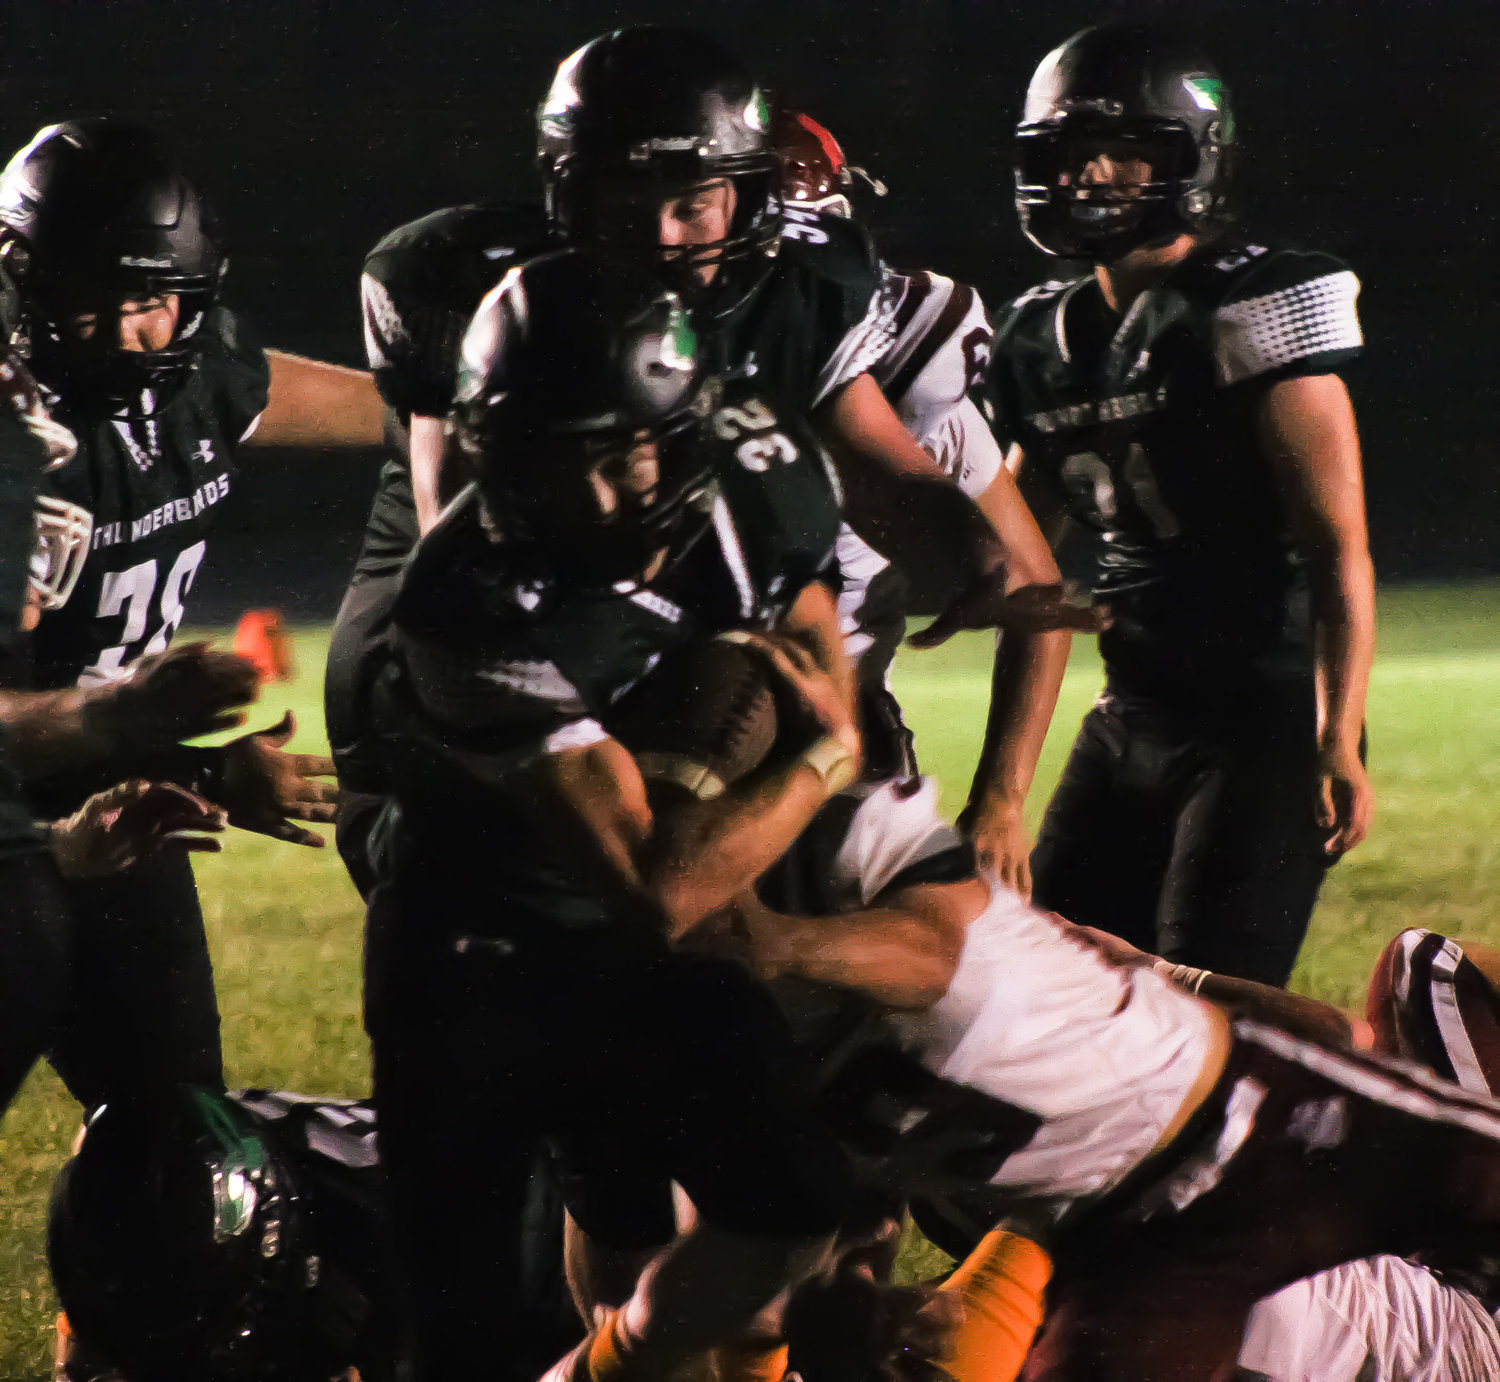 North Callaway junior running back Tucker Wright scores the touchdown Friday that gave the Thunderbirds a 30-12 lead. North Callaway won by the same score even after junior running back and 100-yard rusher Riley Humphrey went down with injury.